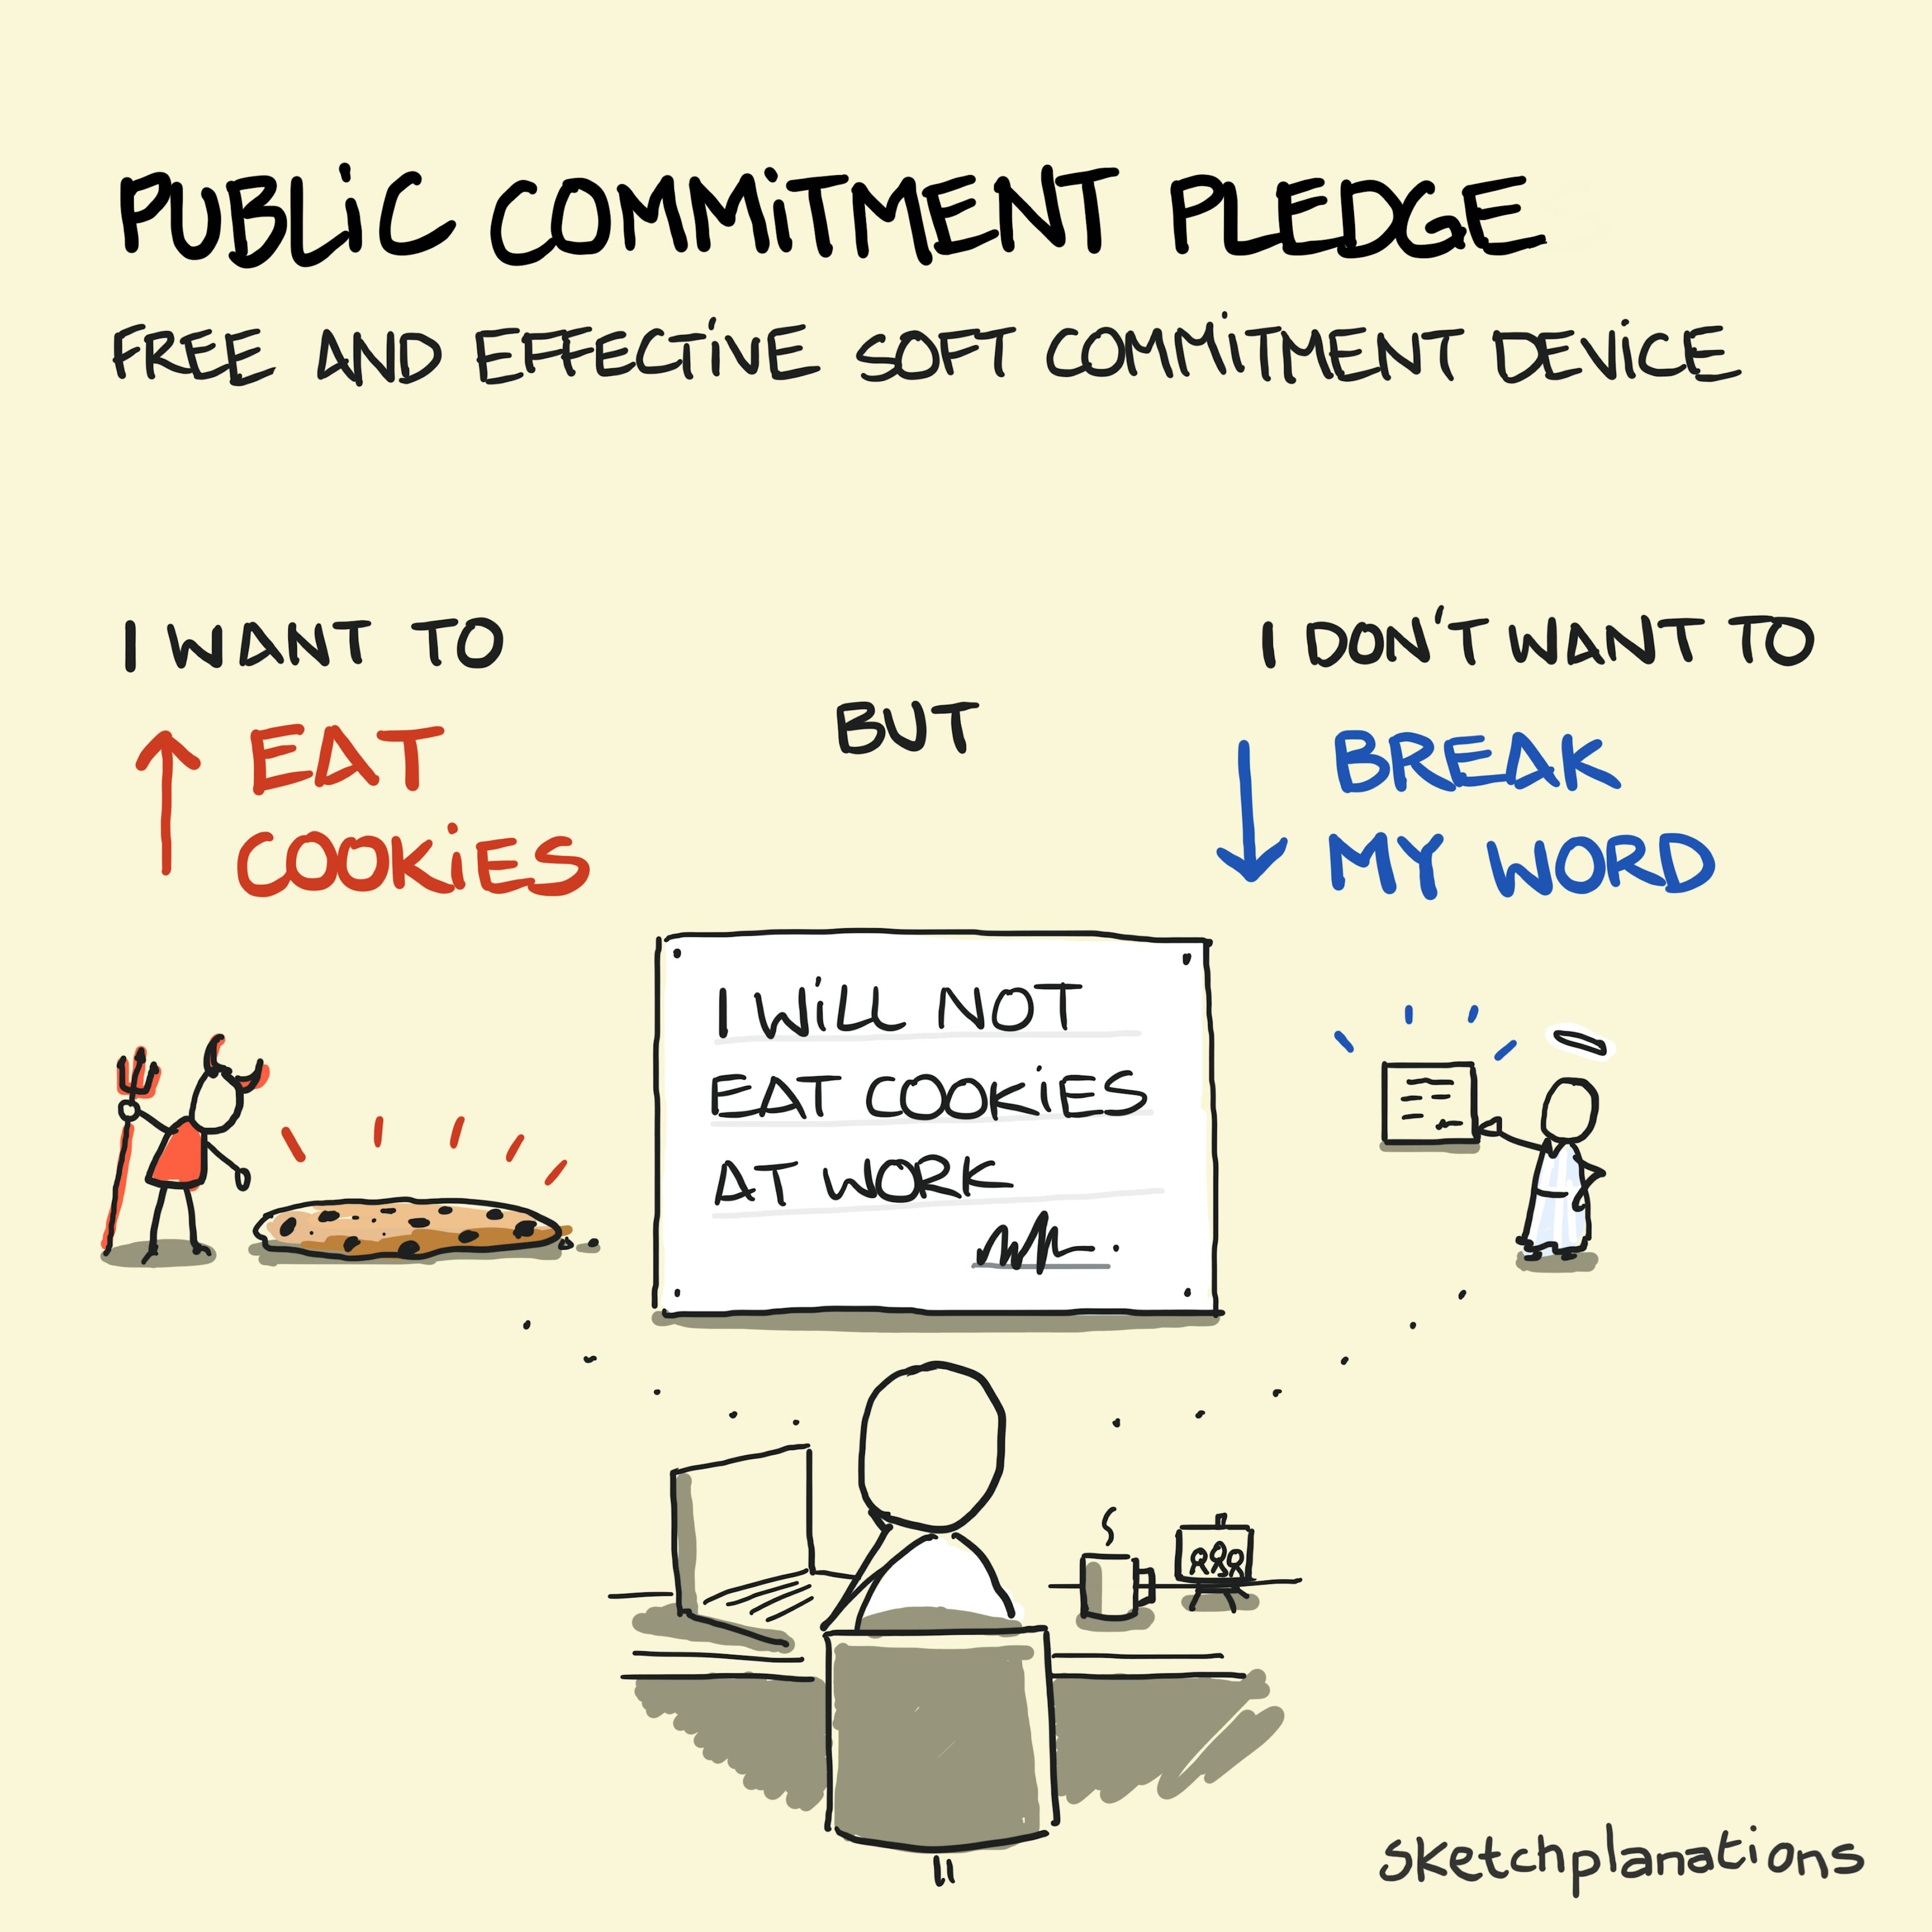 Public commitment pledge explanation - a soft commitment device shown by someone battling a desire to eat cookies with a public commitment